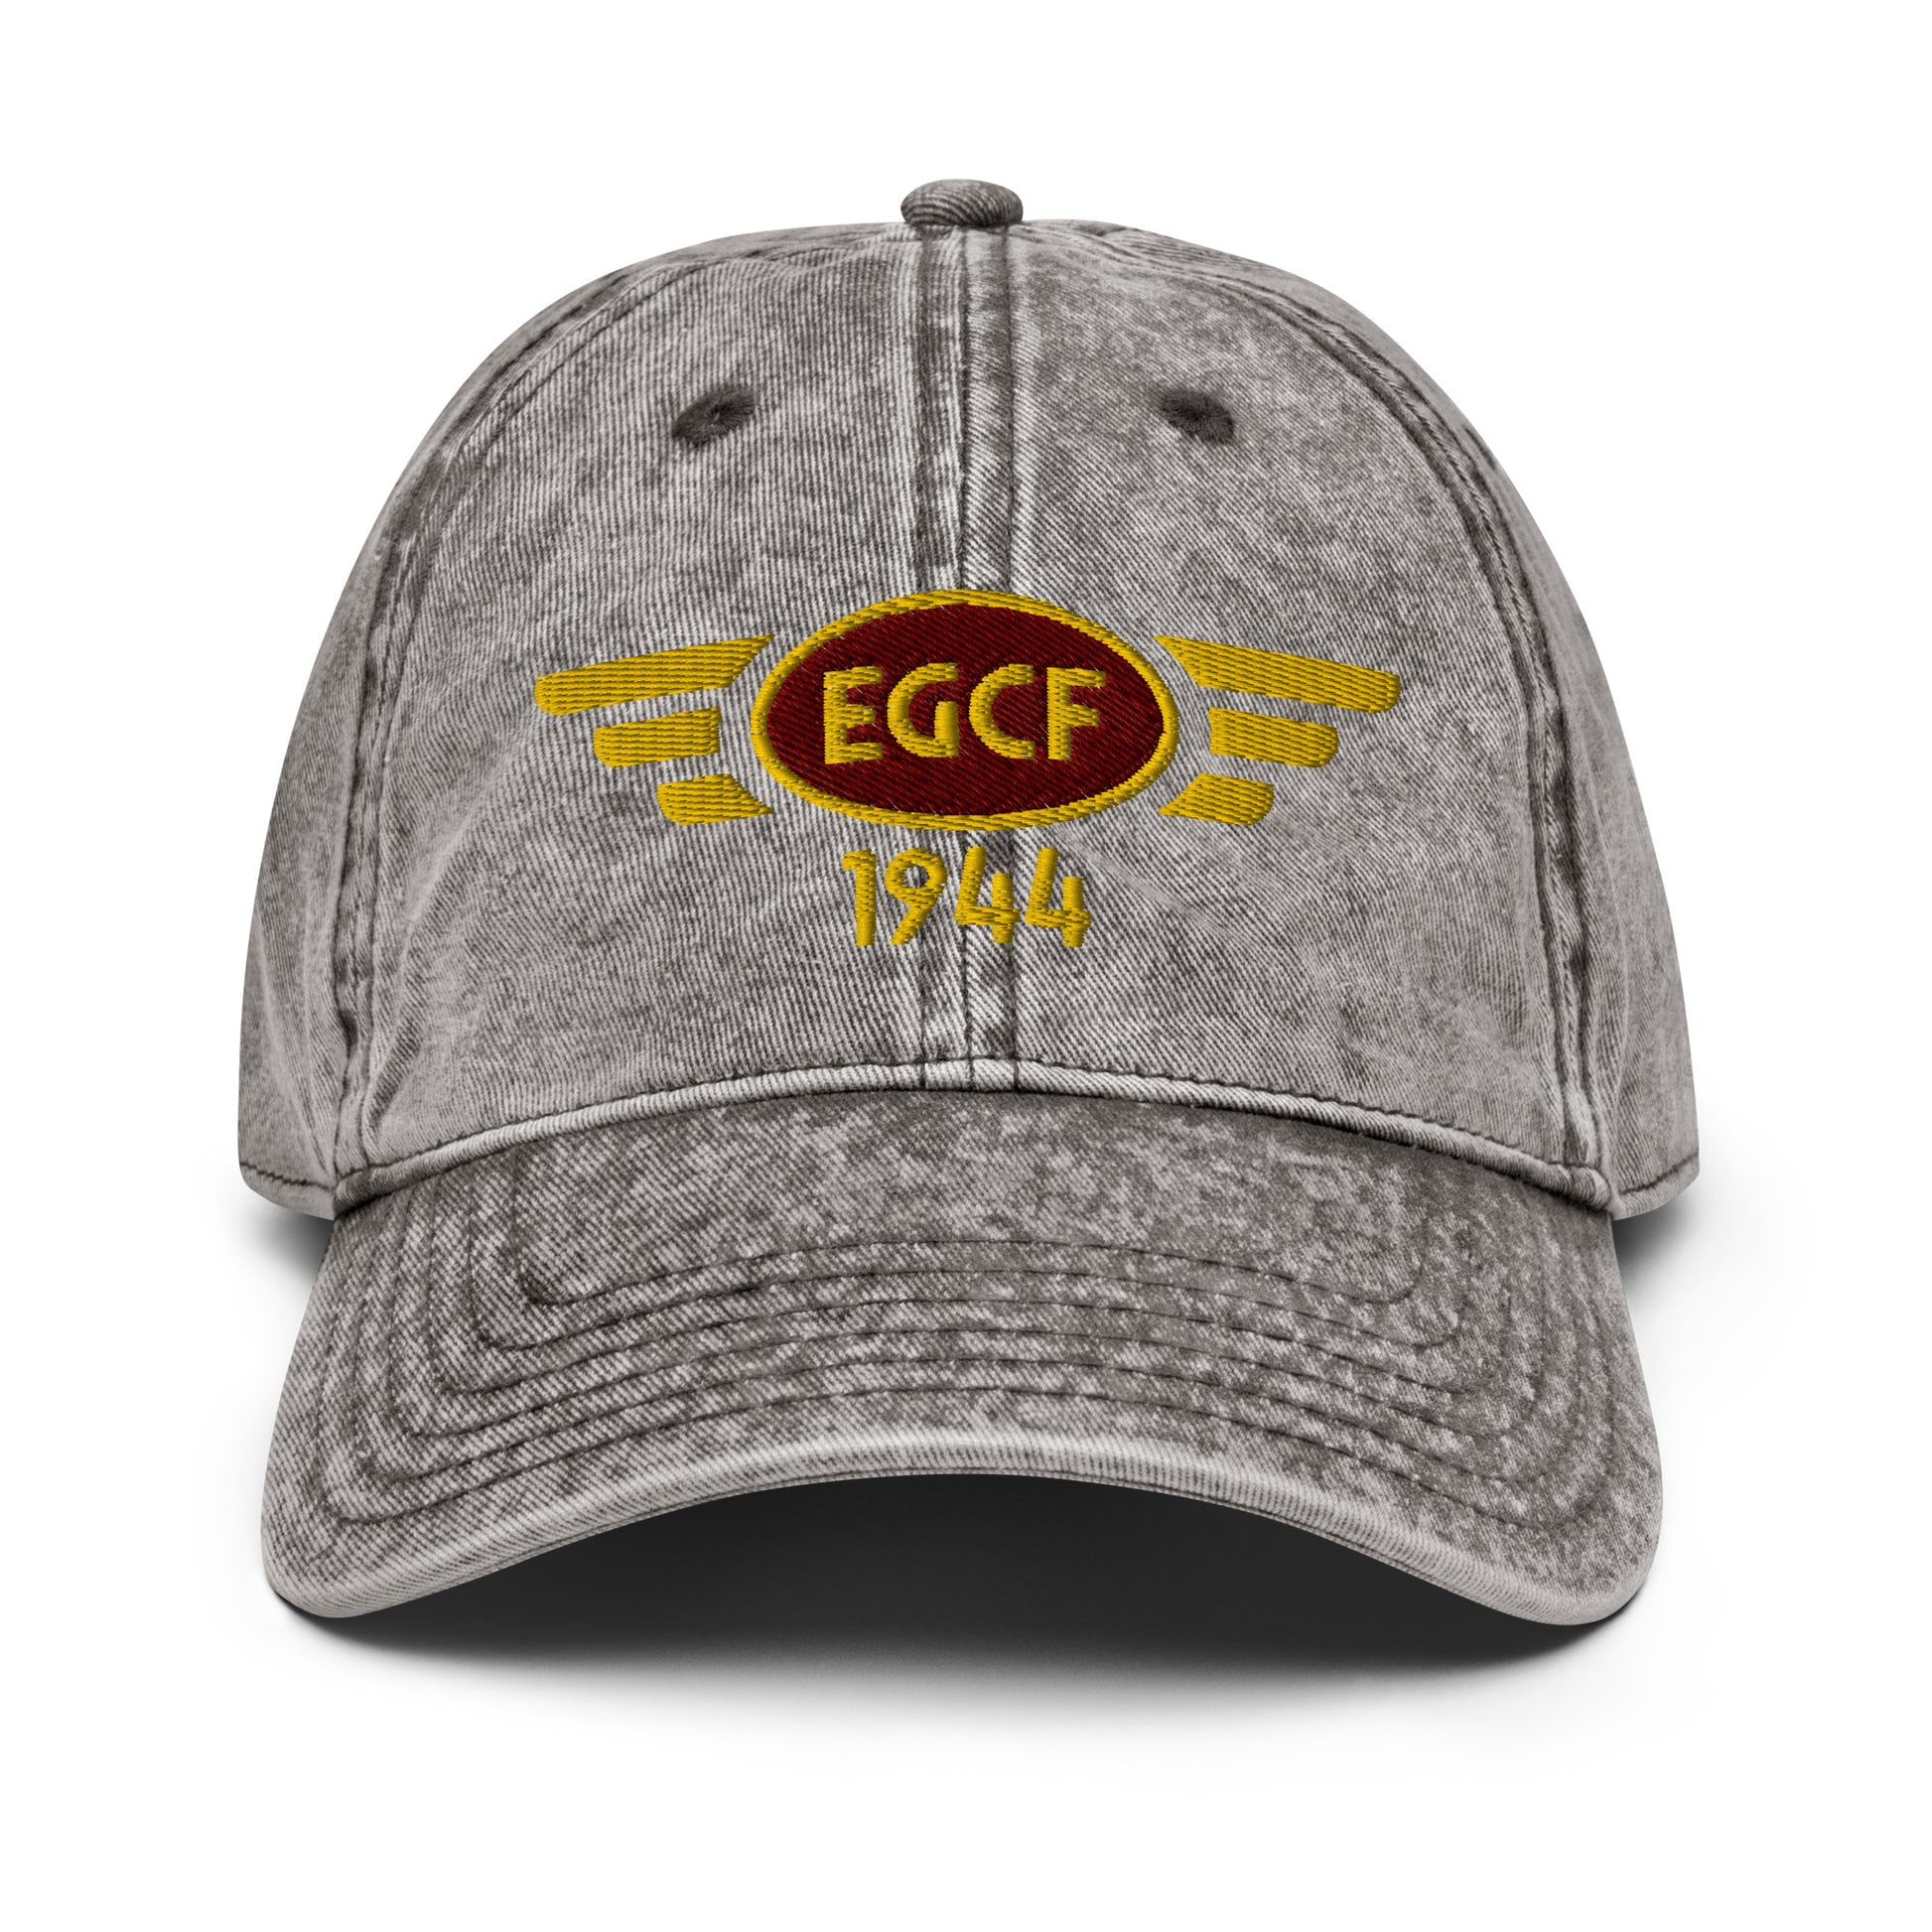 Charcoal gray coloured cotton twill baseball cap with embroidered vintage style aviation logo for Sandtoft Airfield.